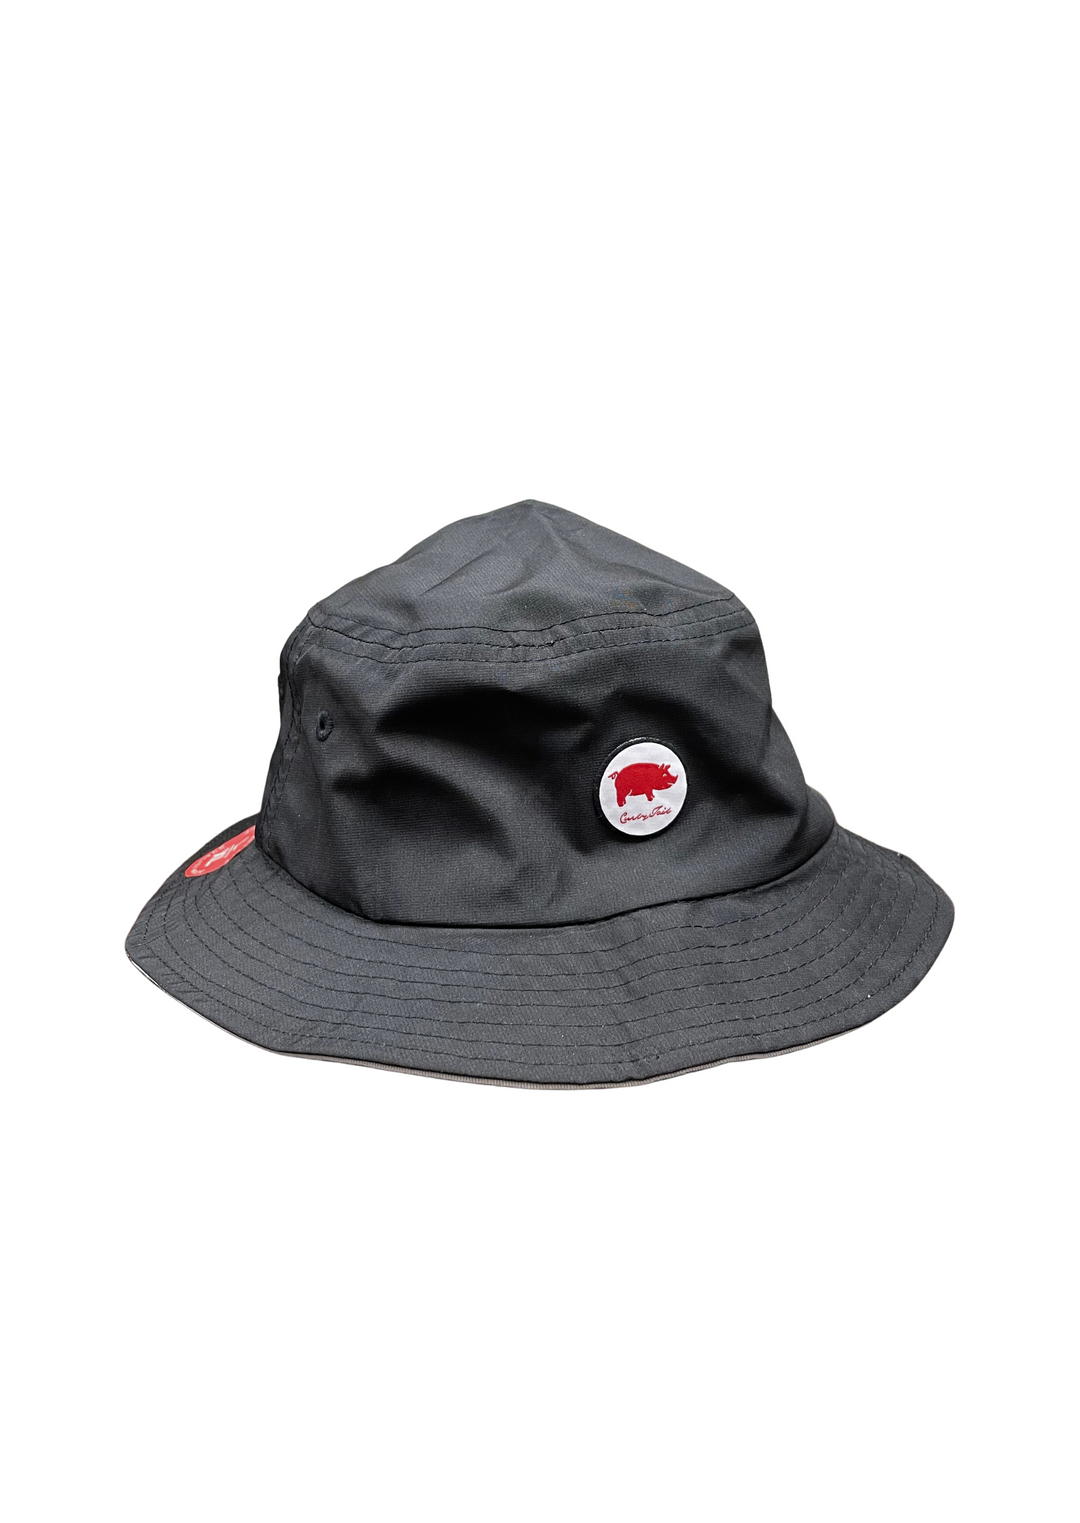 Curly Tail Bucket Hat